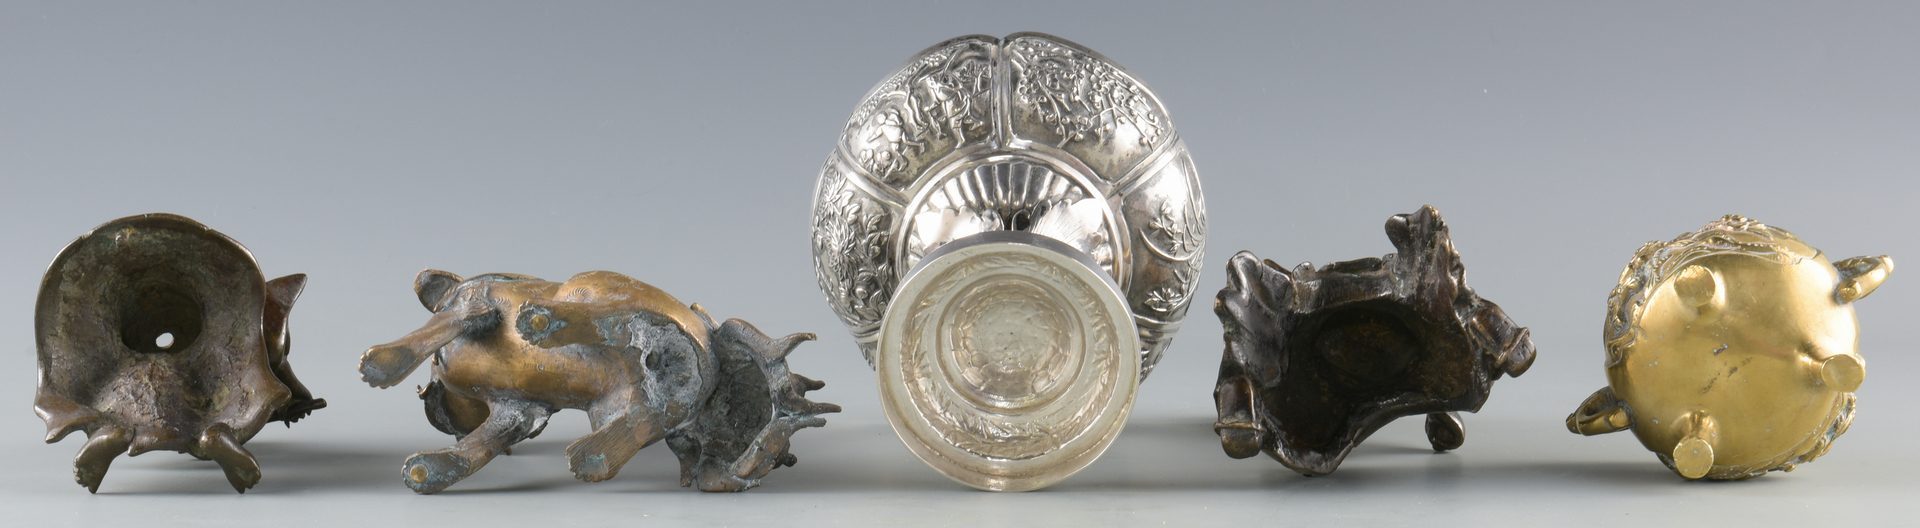 Lot 13: 5 Chinese Silver & Bronze items